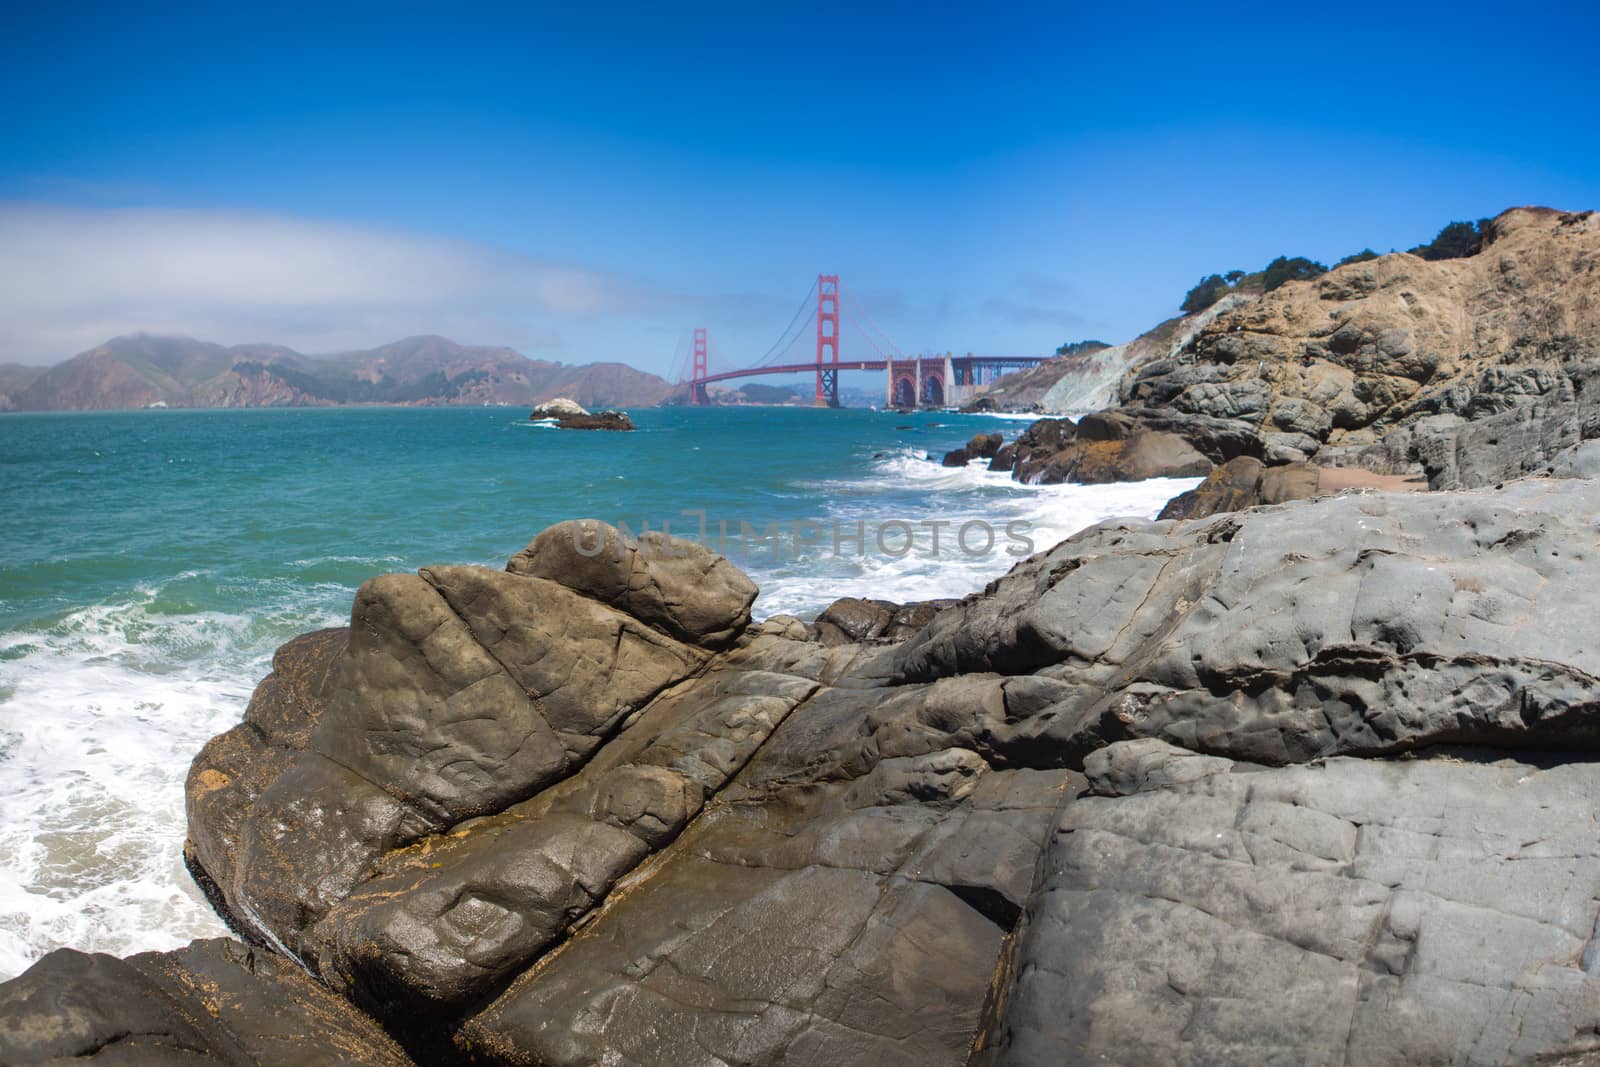 Panorama of the golden gate suspension bridge in Frisco bay by watchtheworld